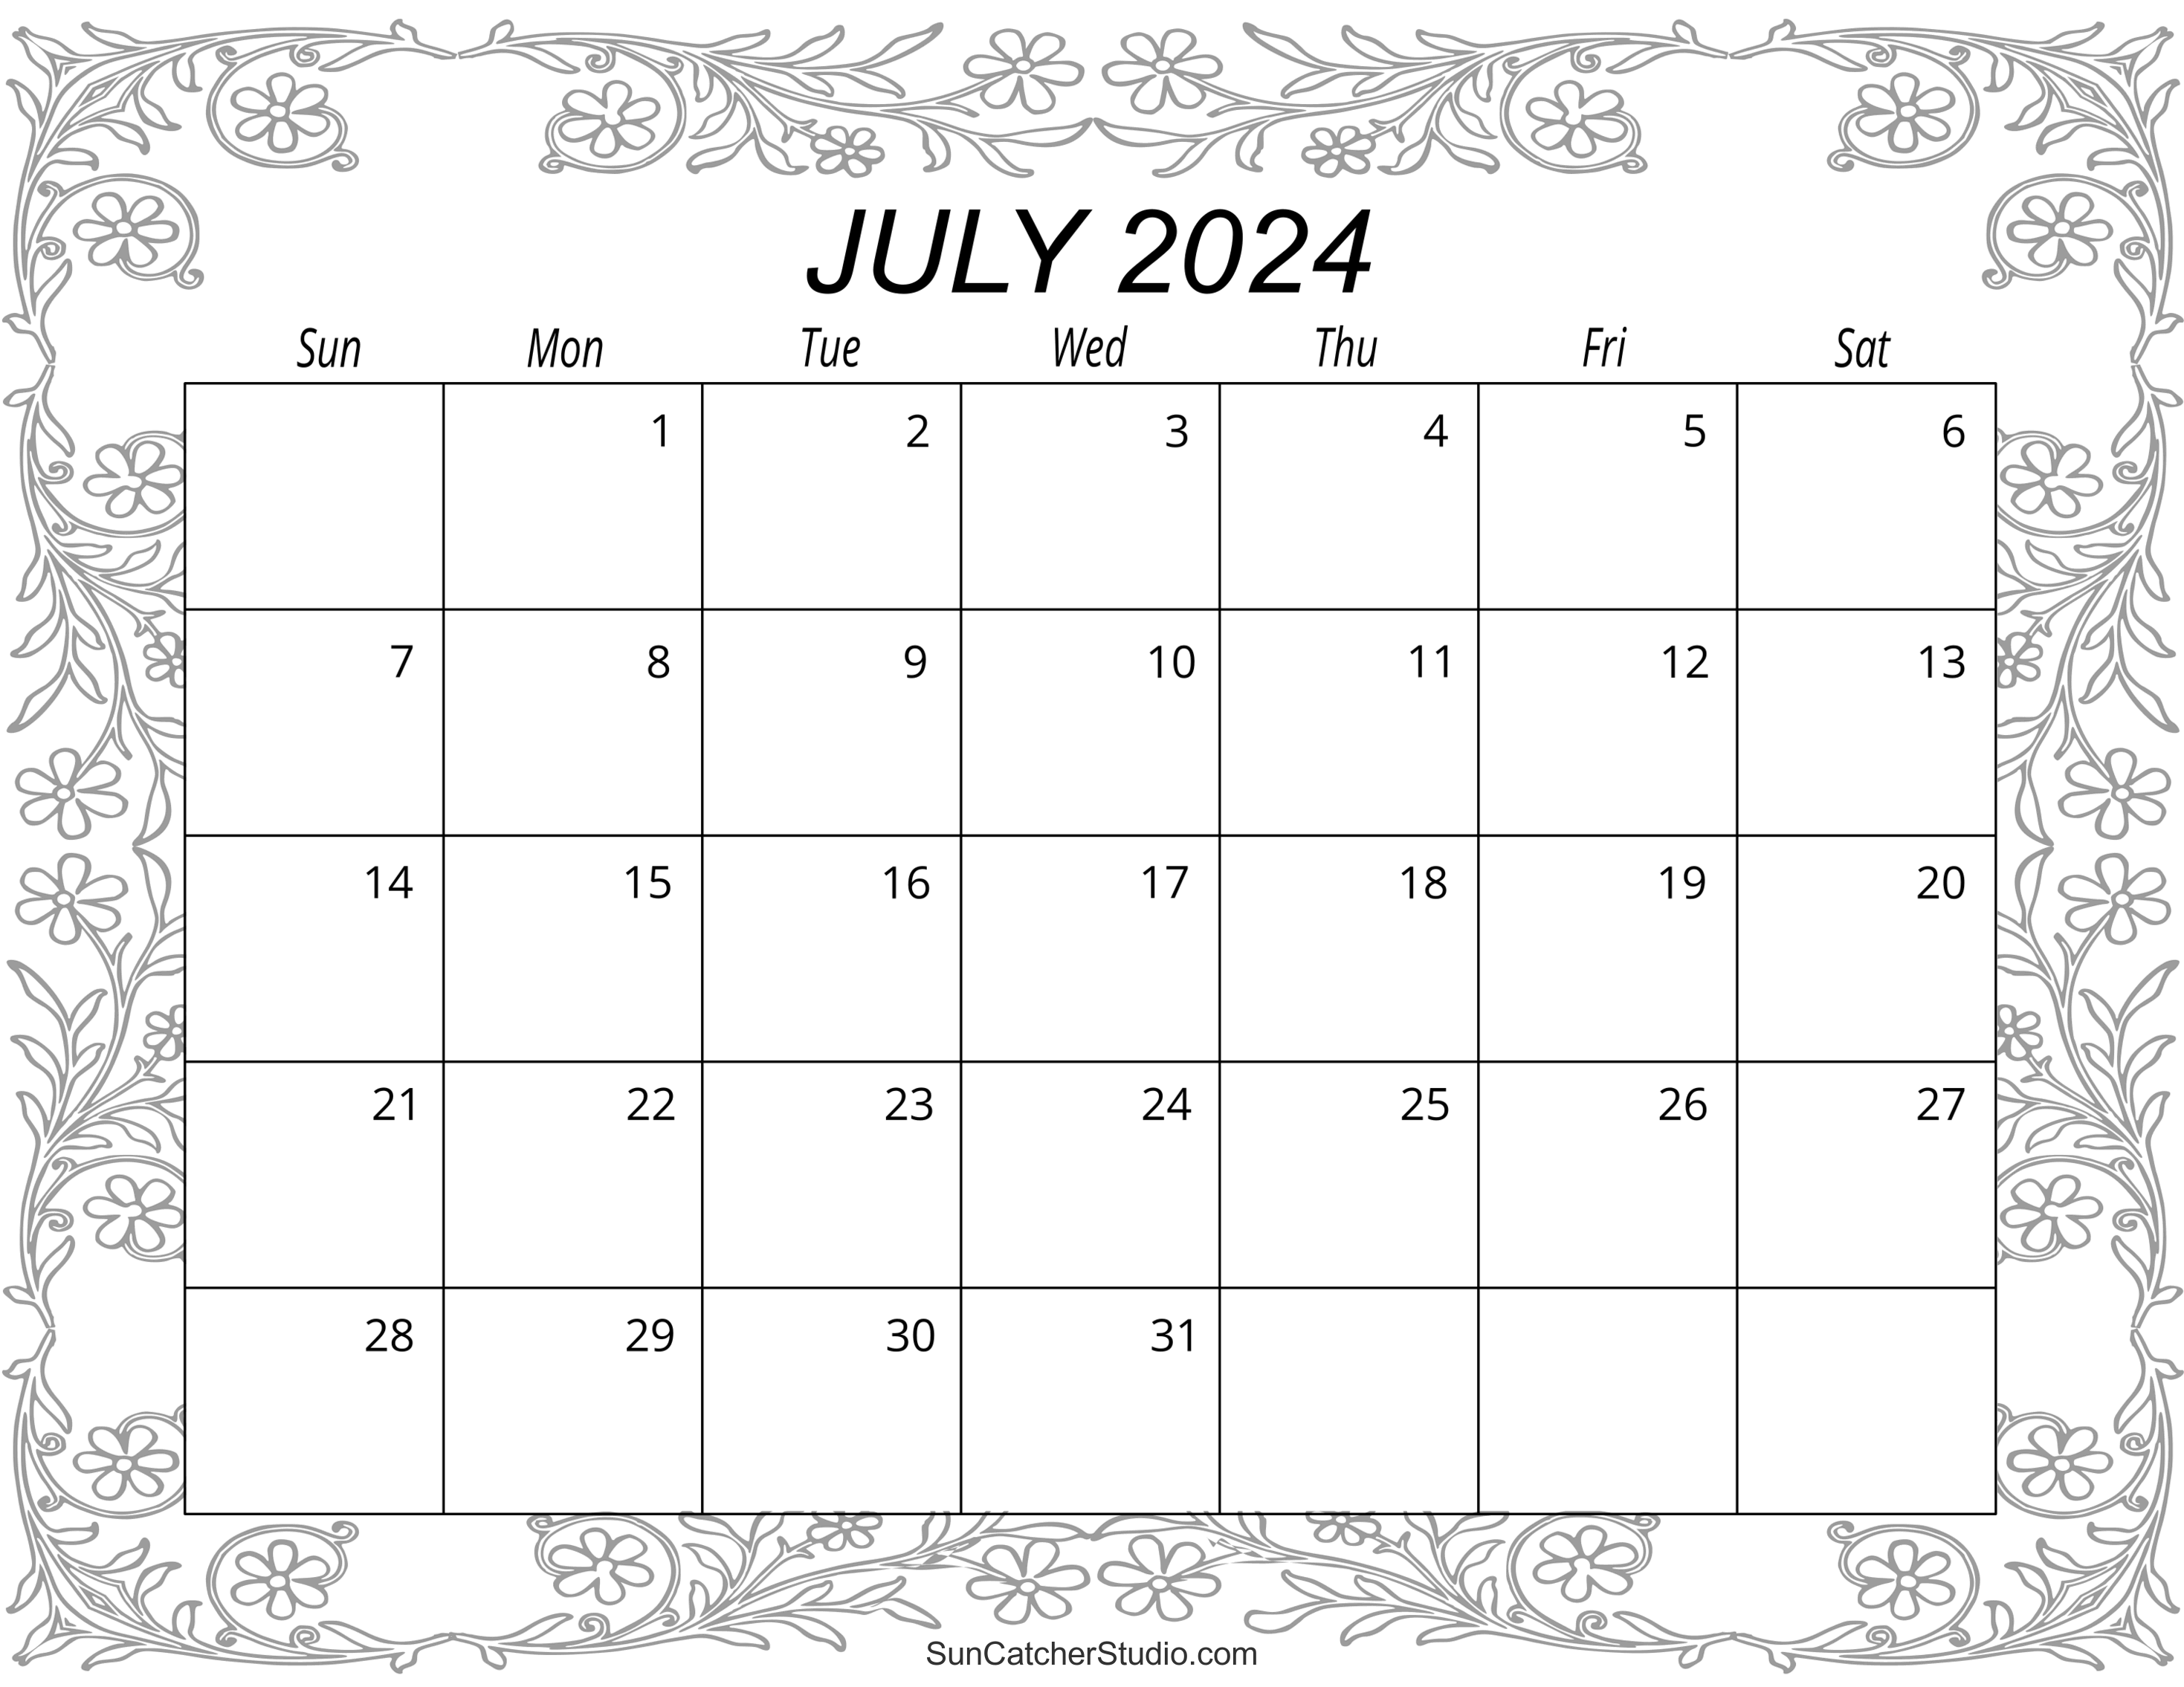 July 2024 Calendar Free Printable Diy Projects Patterns Monograms Designs Templates 7658